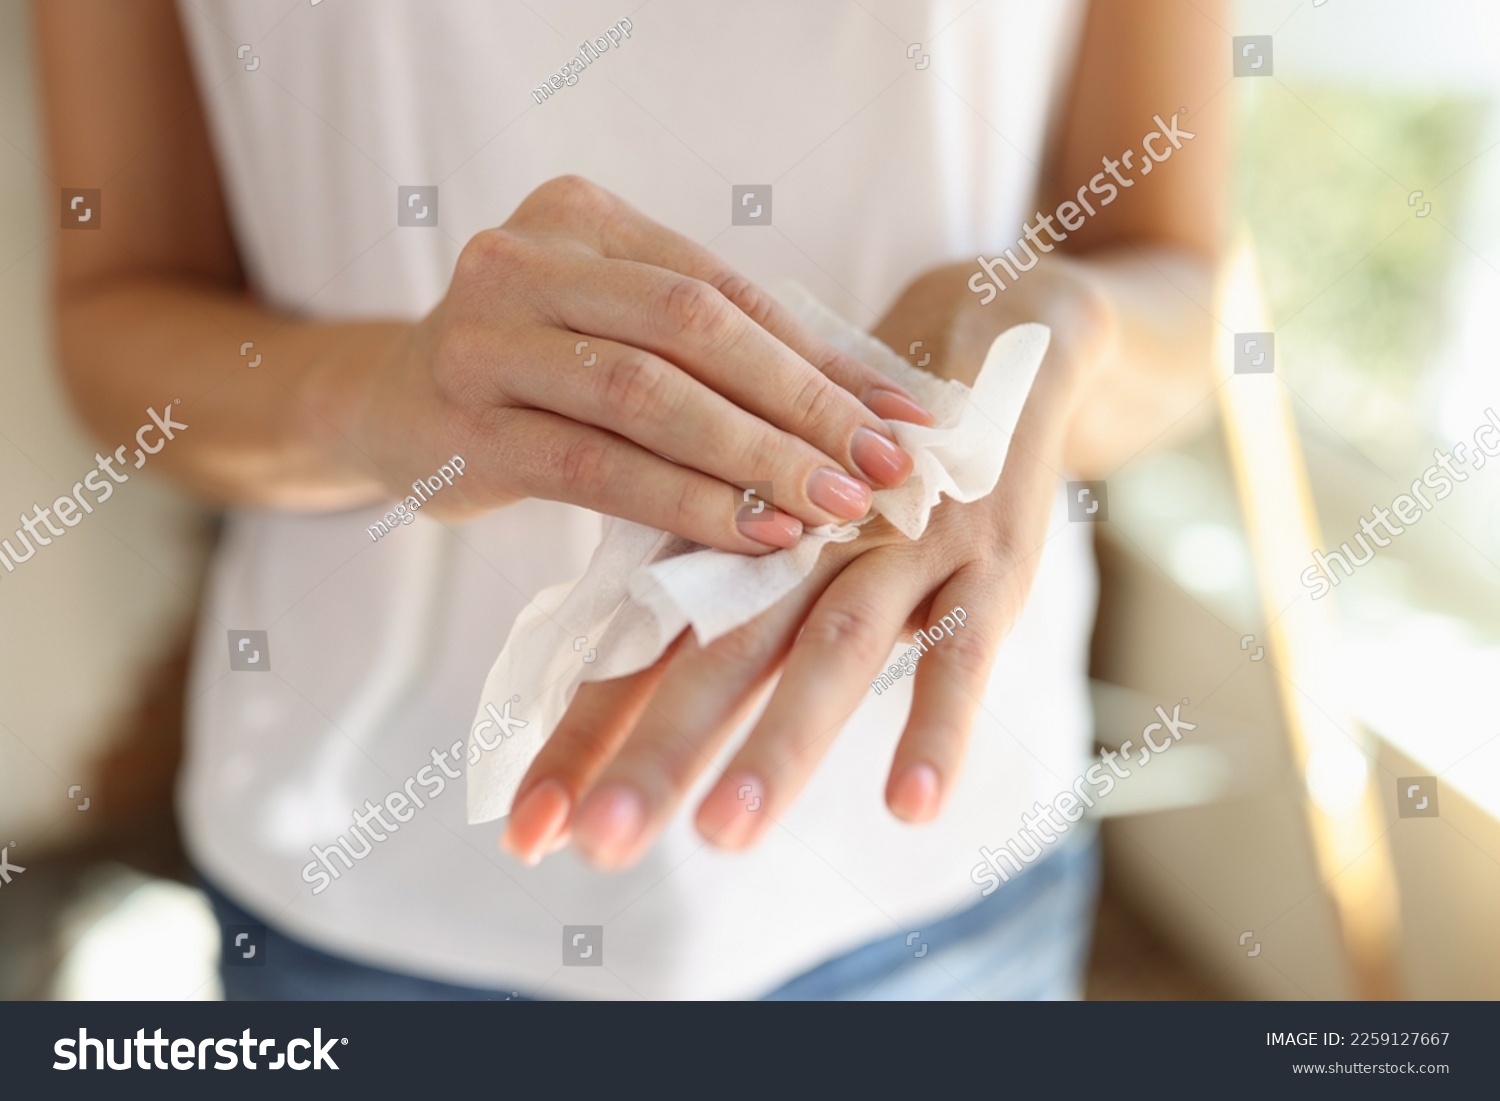 Woman cleans hand with wet wipes close up. Hygiene and skin care concept. #2259127667